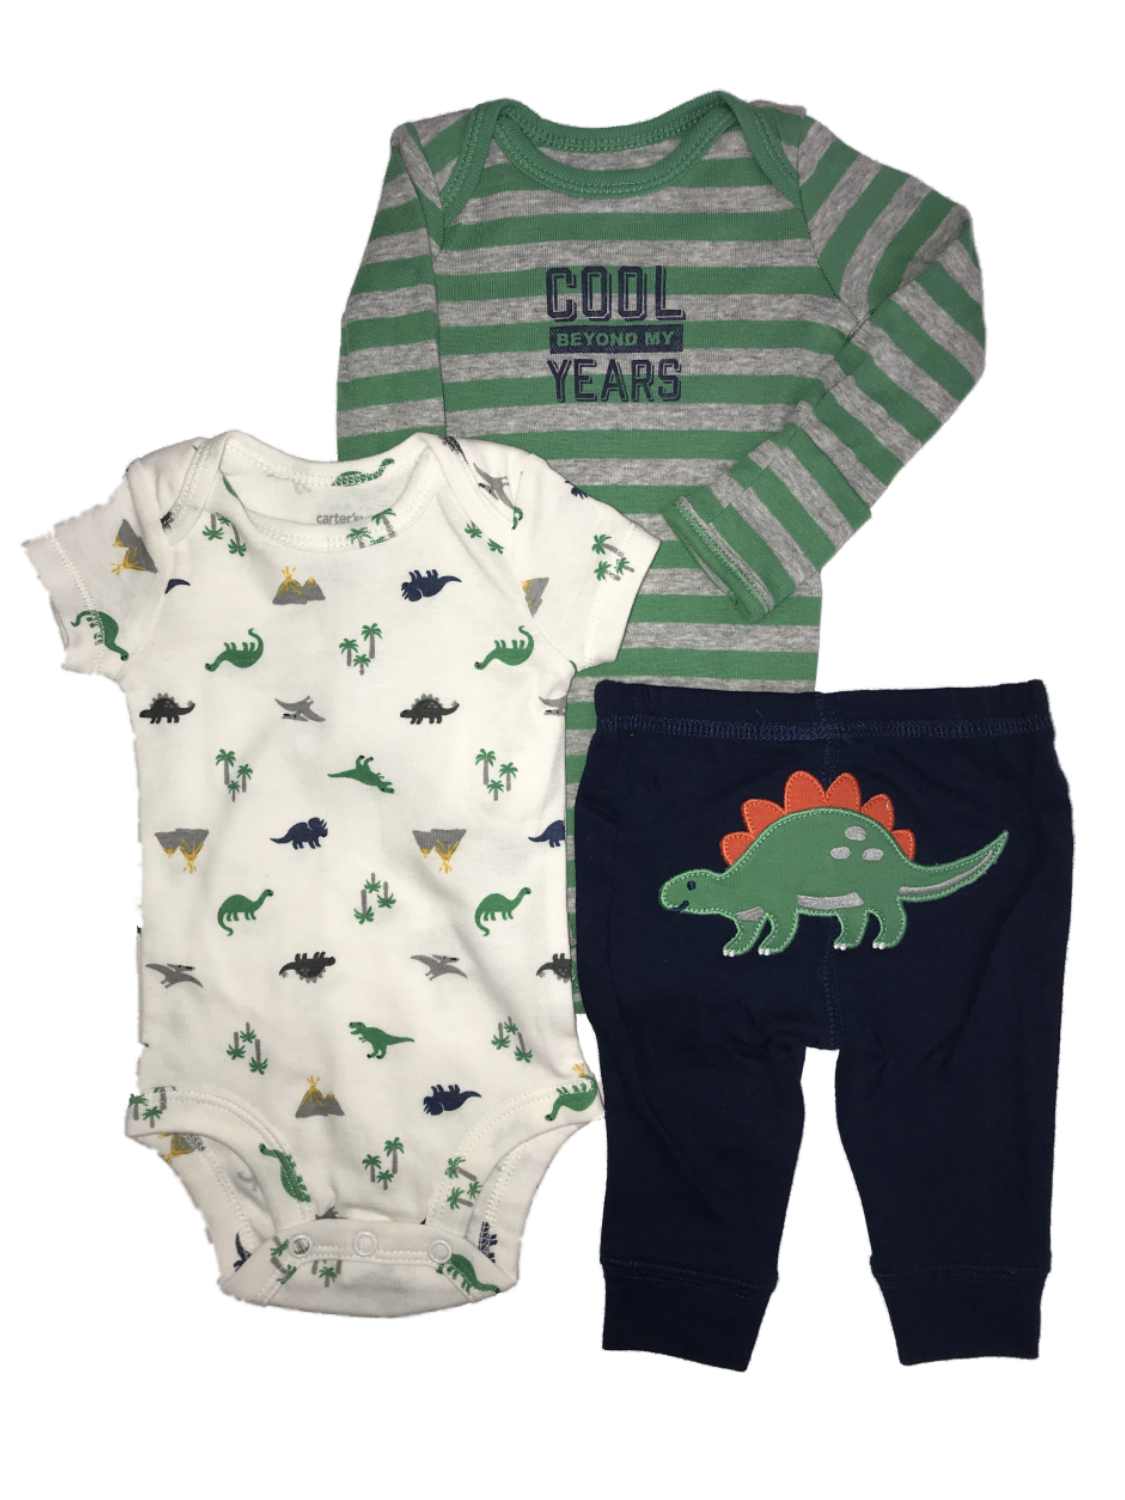 Carter's Carters Infant Boys 3 Piece Green Striped & Dinosaur Baby Bodysuit Outfits NB